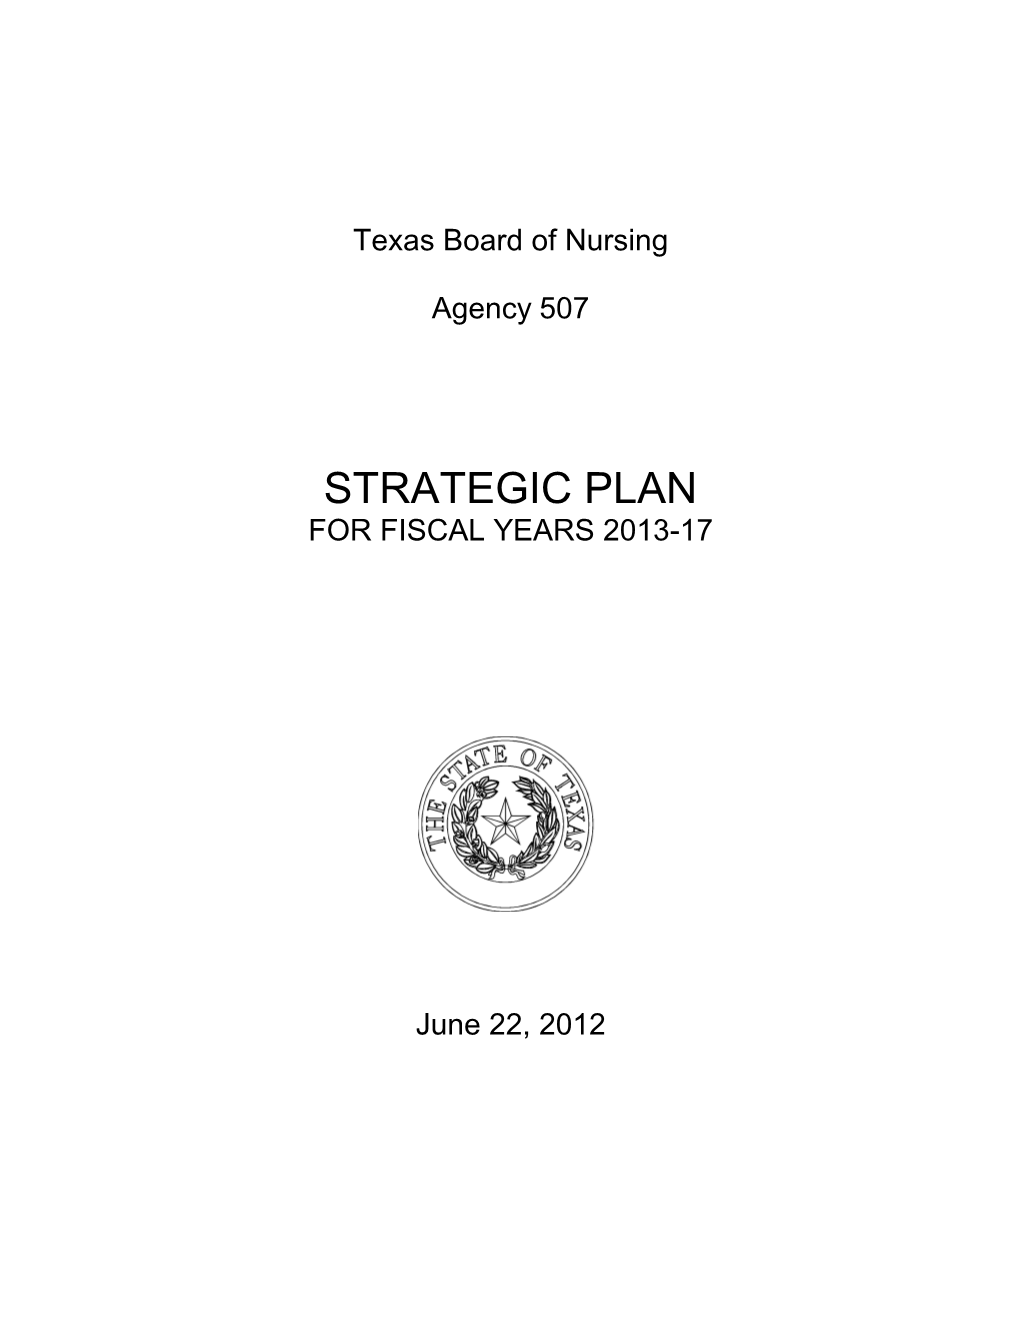 Strategic Plan for Fiscal Years 2013-17